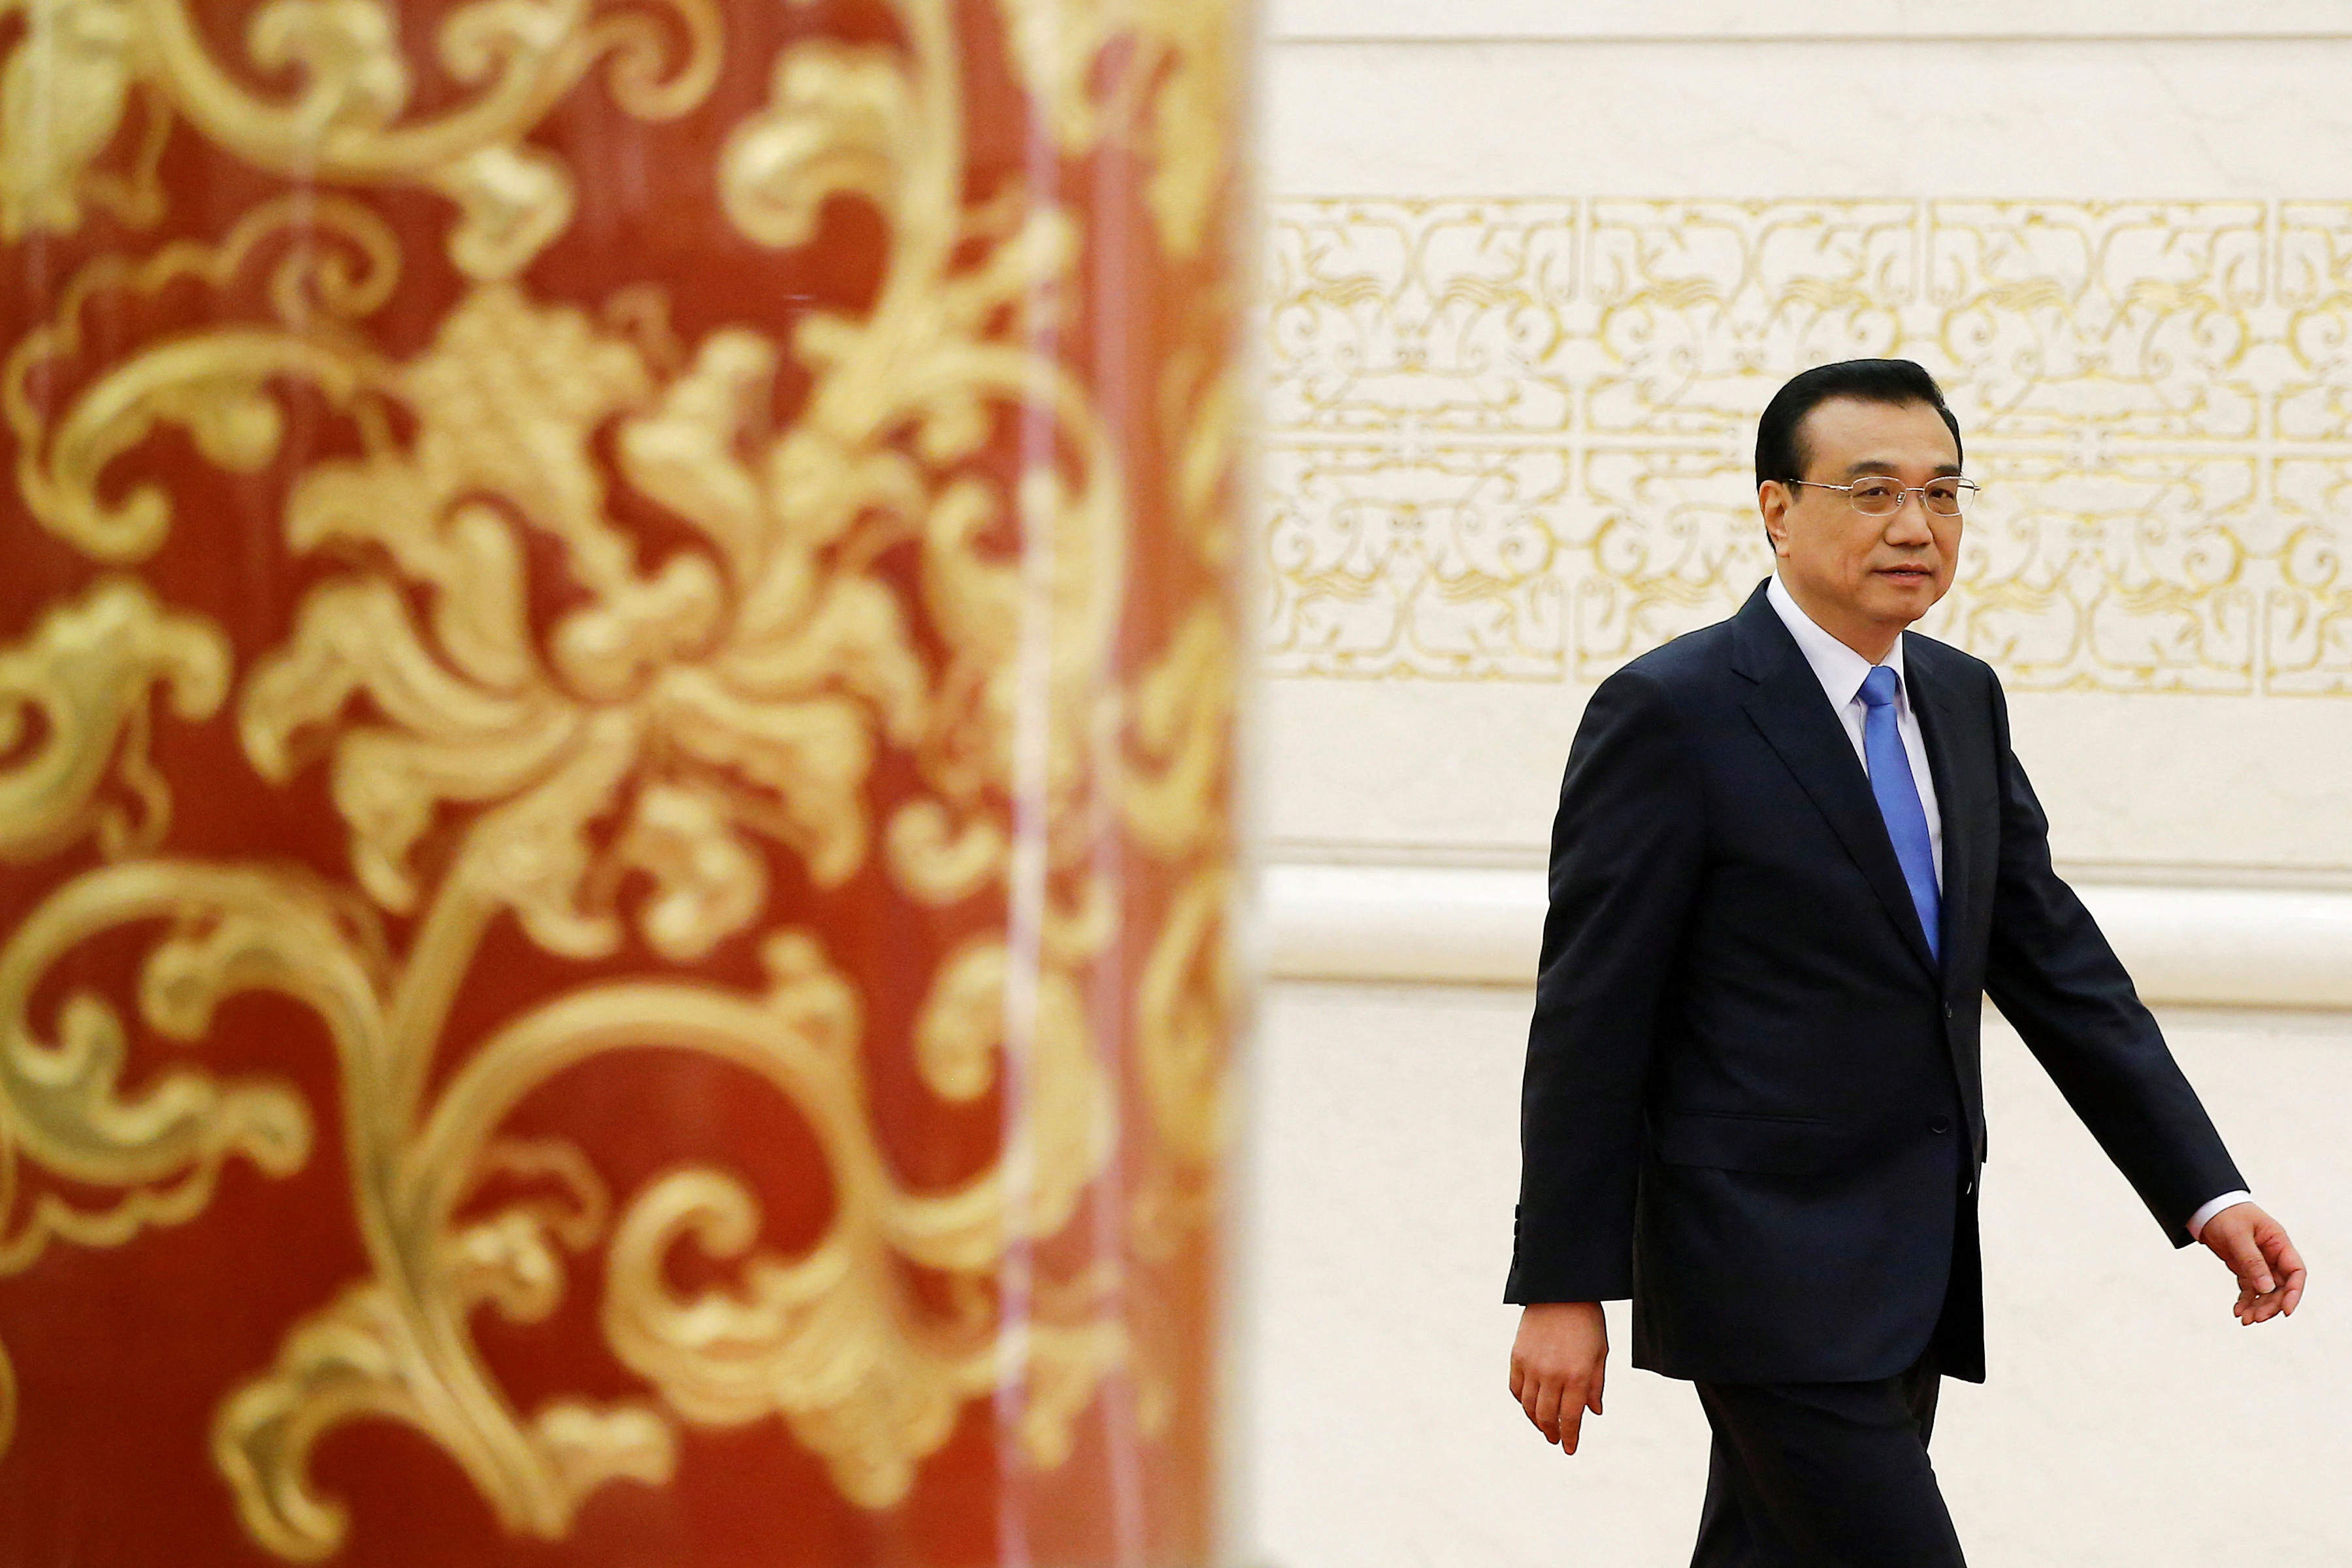 China's Premier Li Keqiang arrives for a news conference after the closing ceremony of China's National People's Congress (NPC) at the Great Hall of the People in Beijing